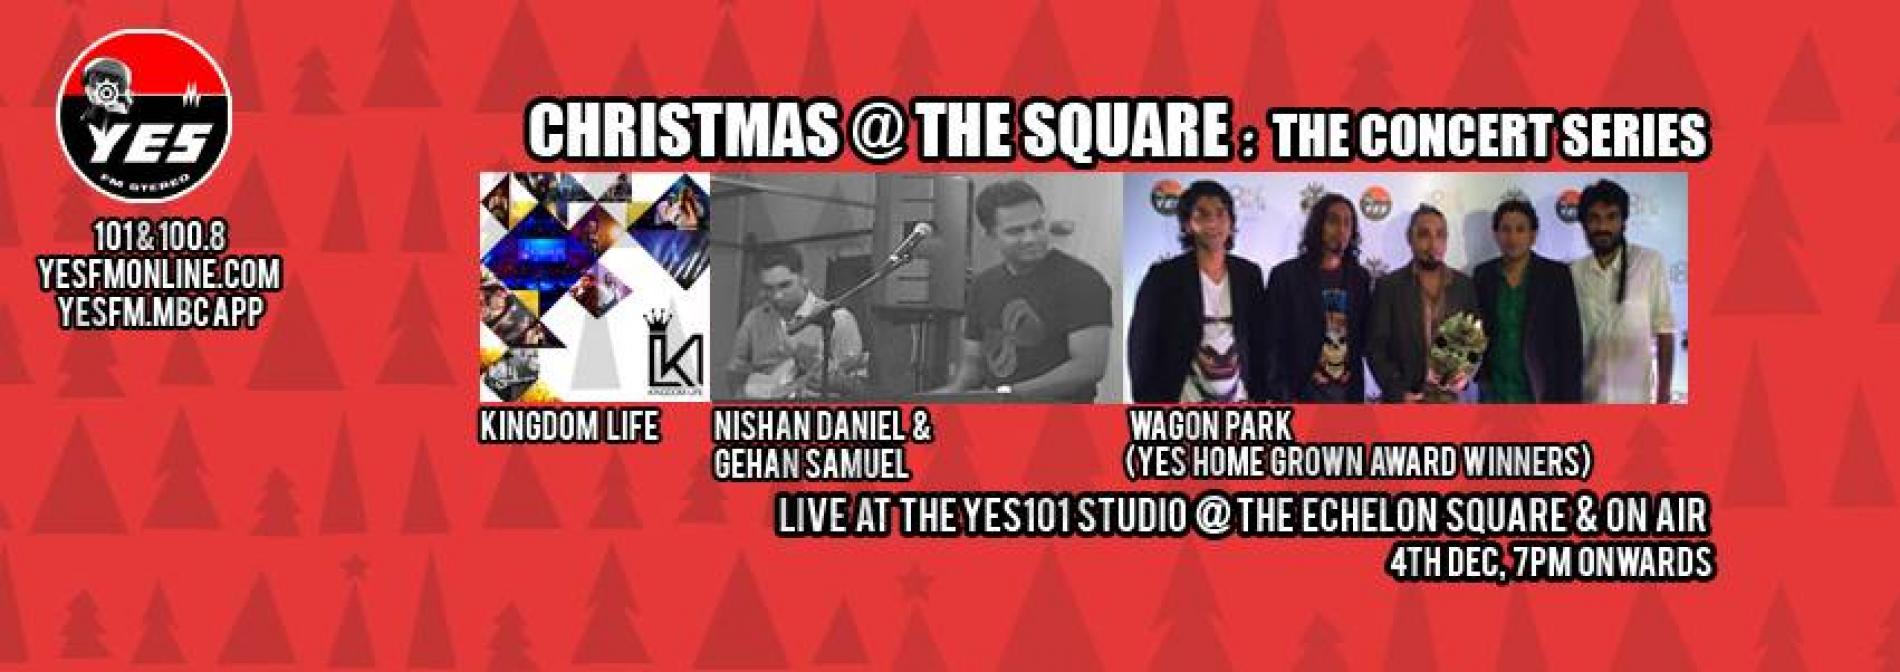 Christmas At The Square: The Concert Series (4th December)